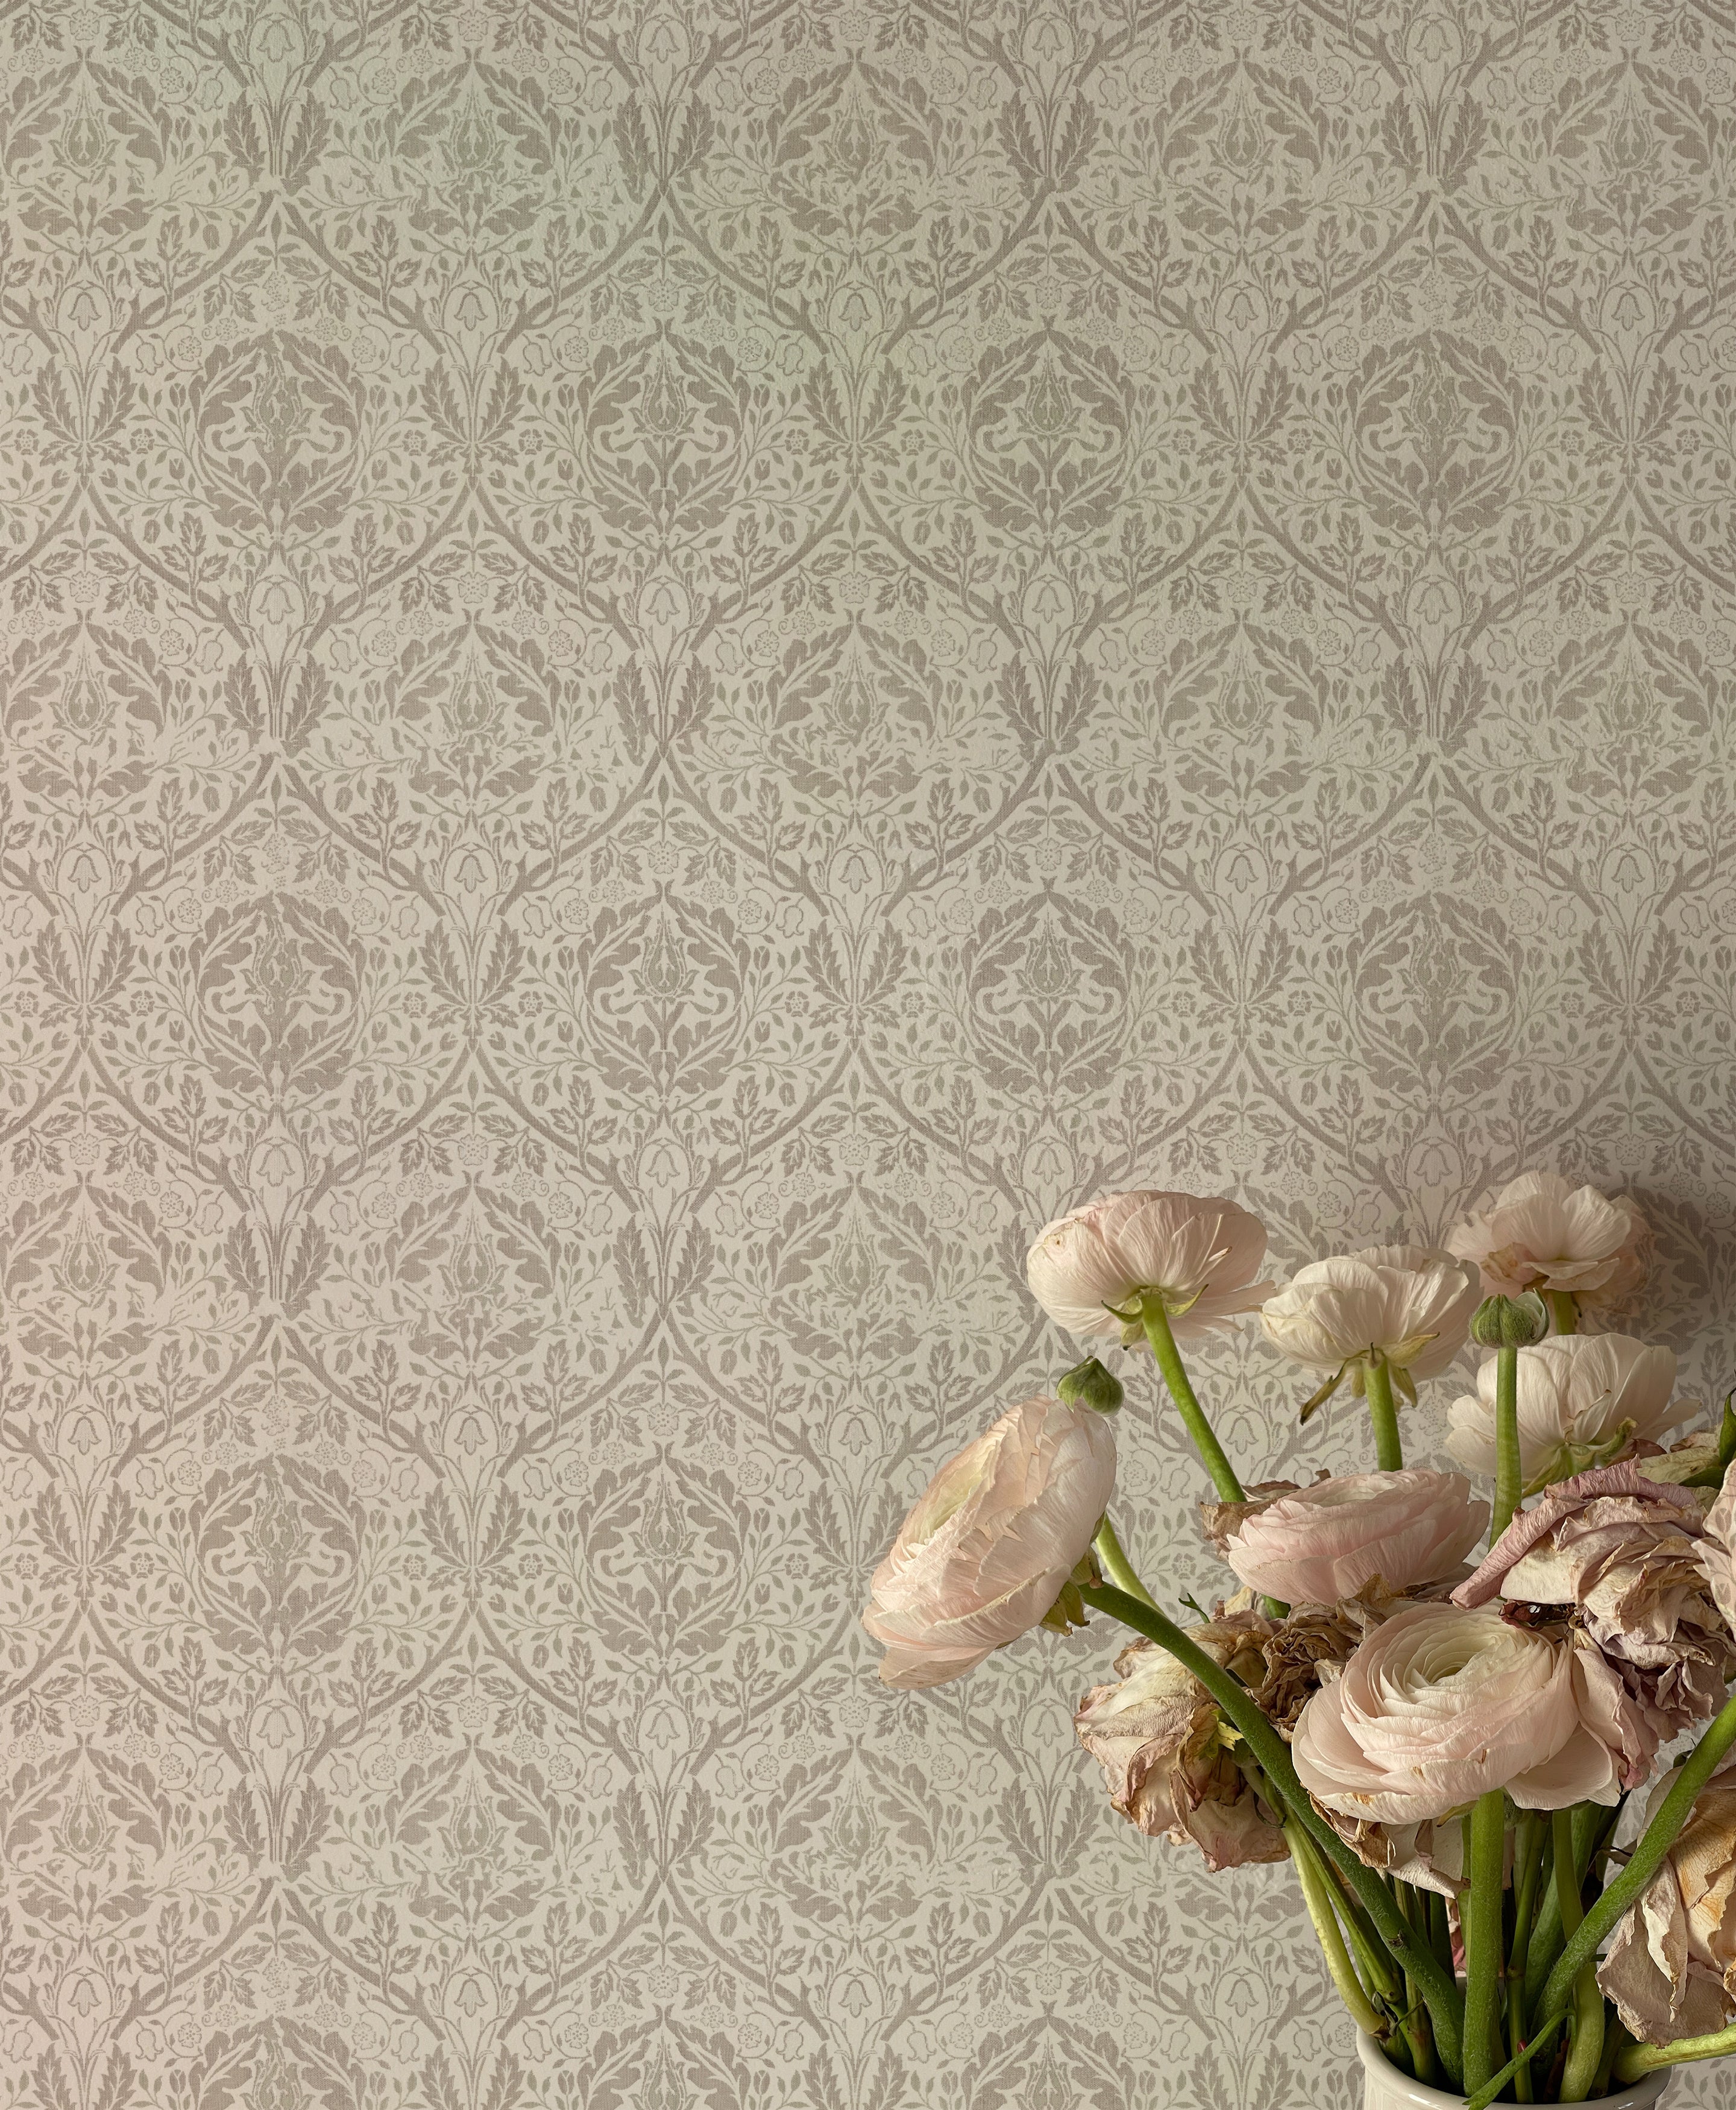 A delicate floral wallpaper in gray and beige hues, displayed behind a vase of light pink ranunculus flowers, partially wilted, adding a touch of natural beauty to the scene. The wallpaper's classic design features detailed flowers and leaves, contributing to a serene and refined ambiance.